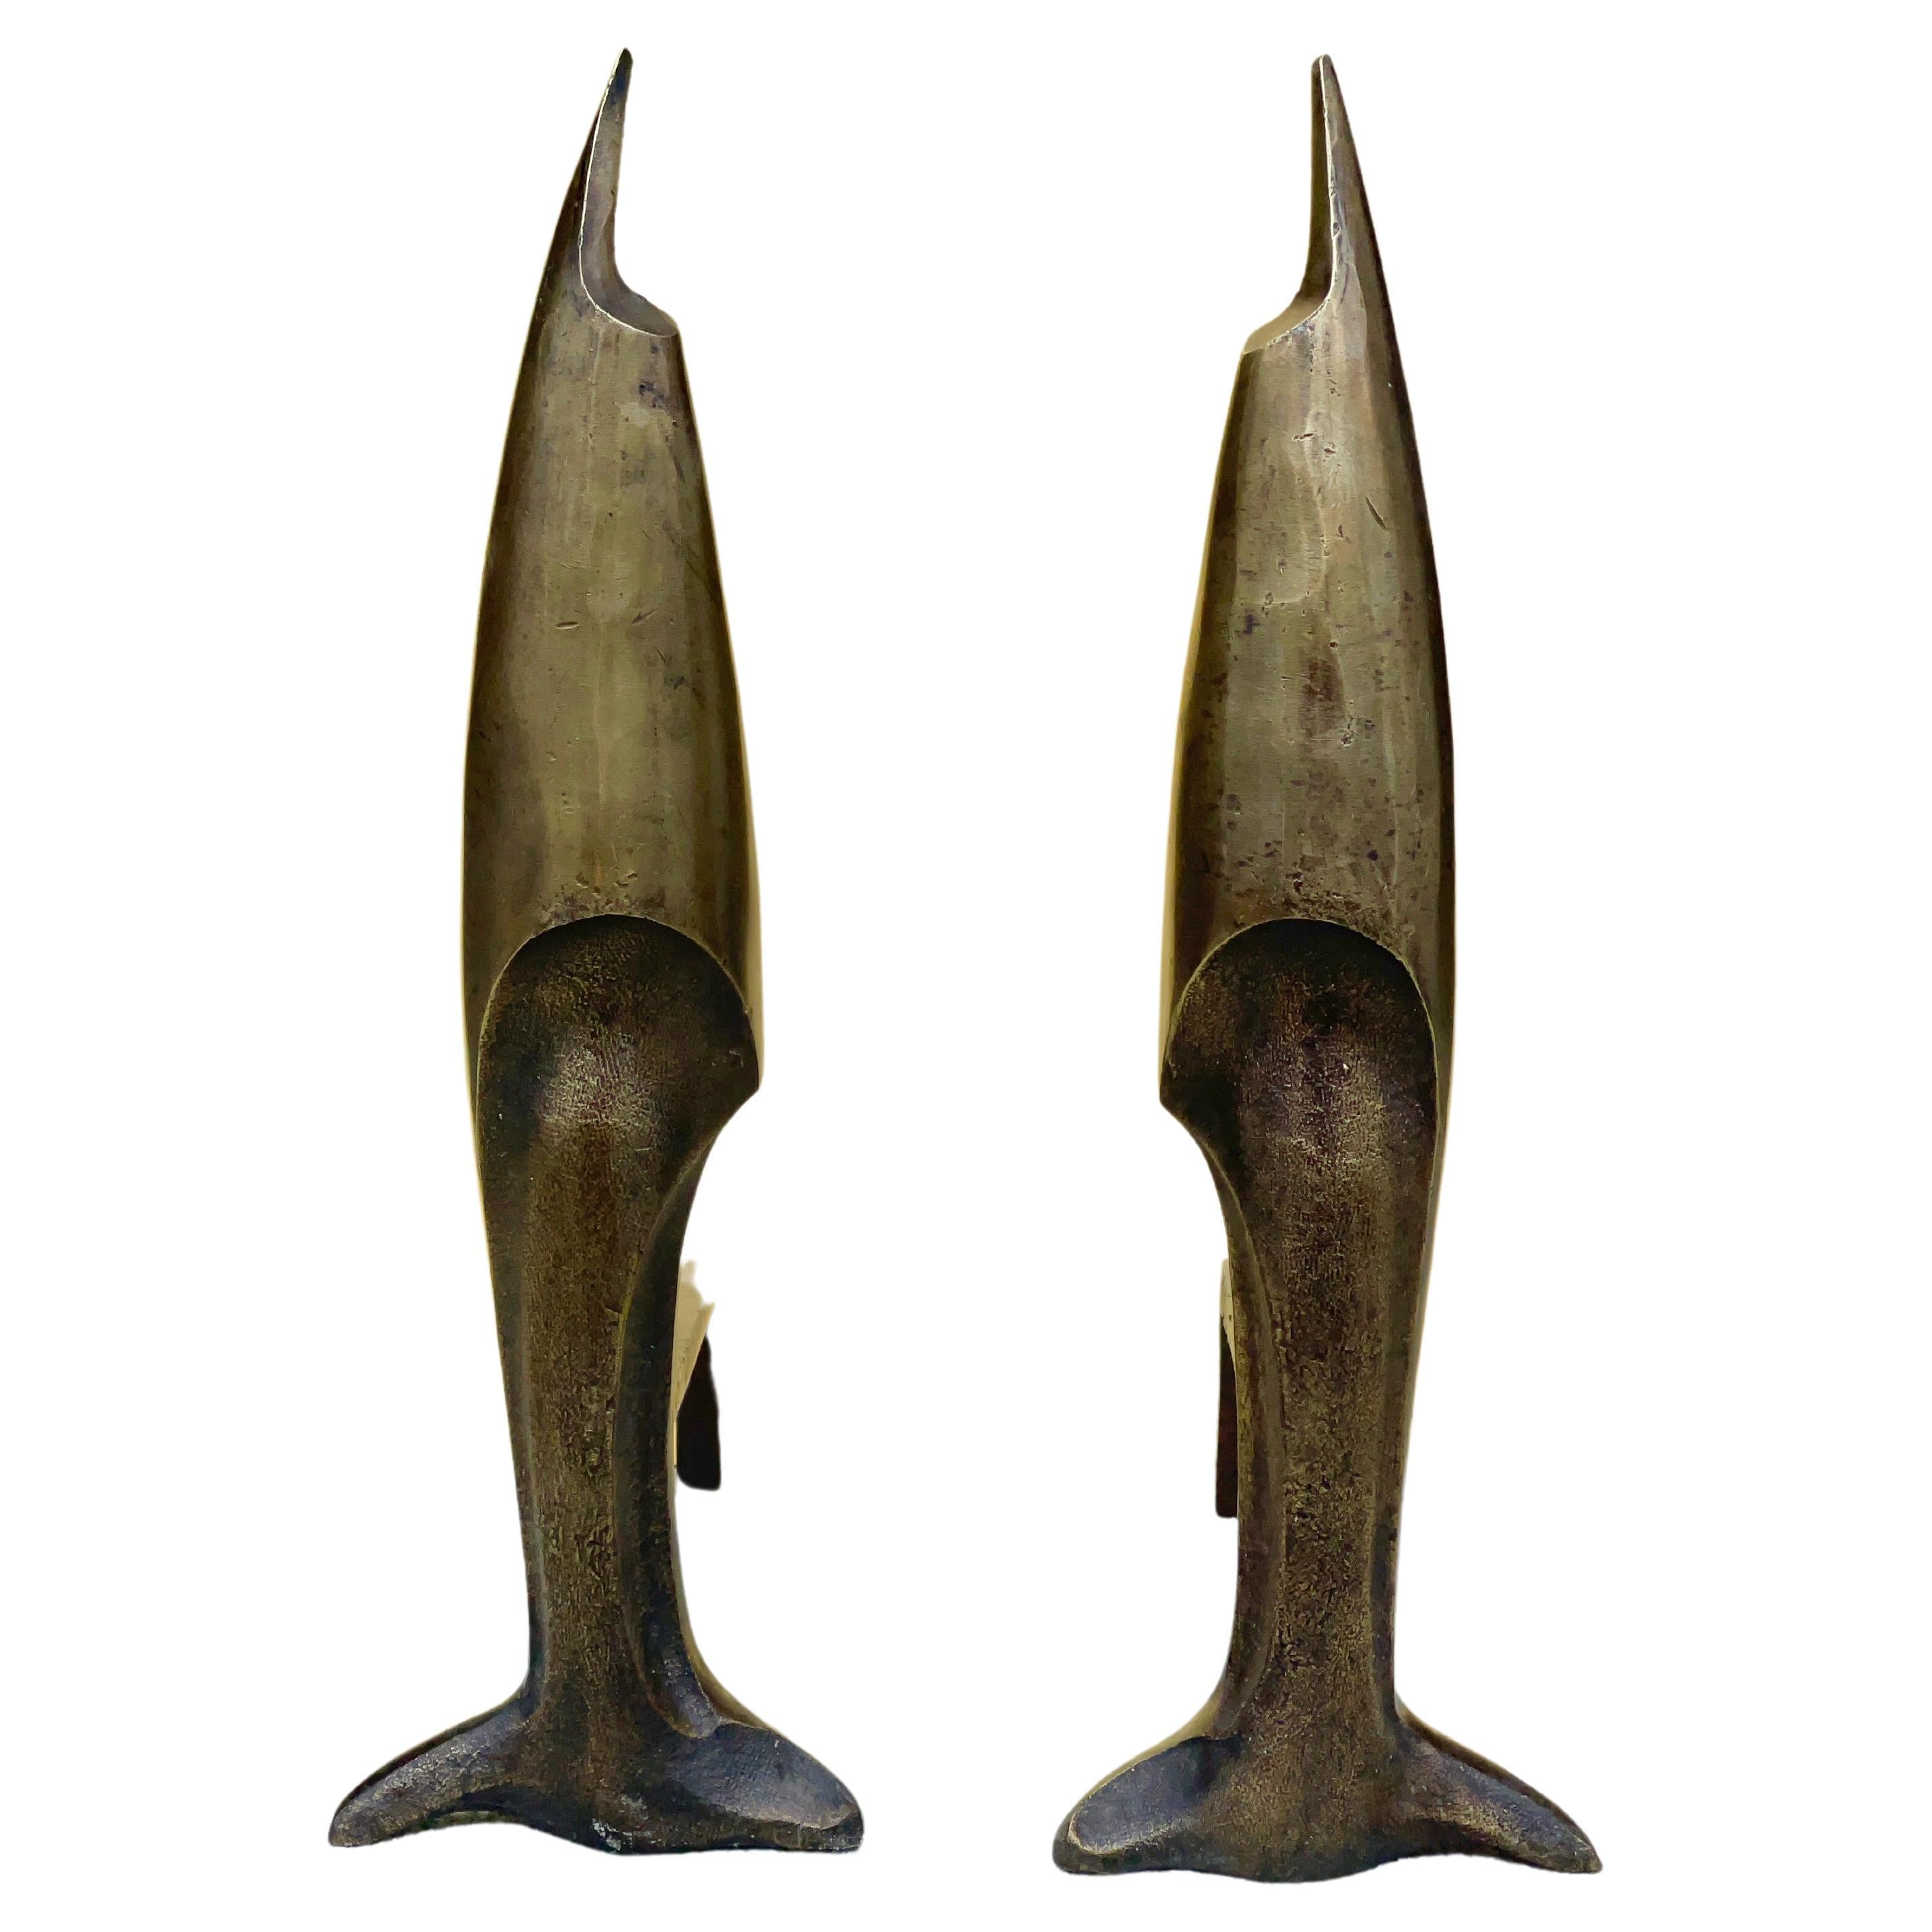 Pair of heavy cast bronze sculptural andirons in the form of a swordfish or dolphin in the manner of a 1926 design by Pierre Emile Legrain.
Apparently unsigned and unmarked.
Original articulating cast iron dogs.
Presented as found with original